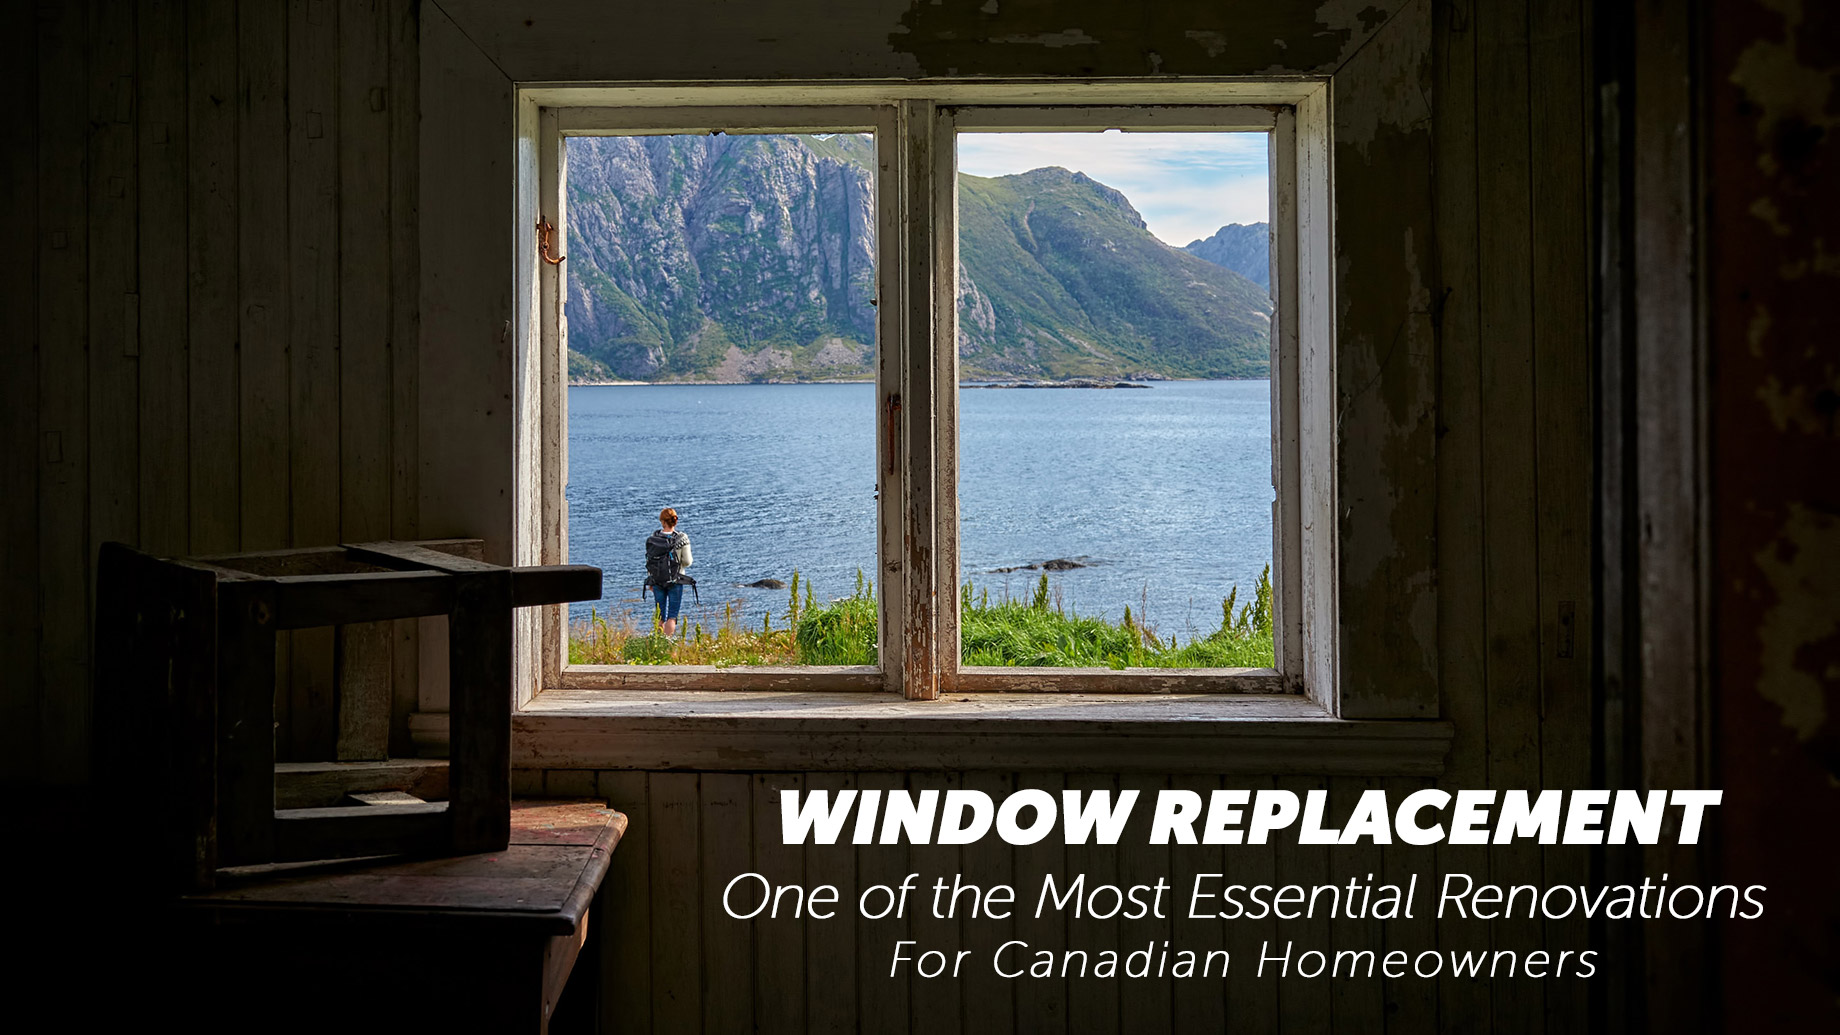 Window Replacement - One of the Most Essential Renovations For Canadian Homeowners